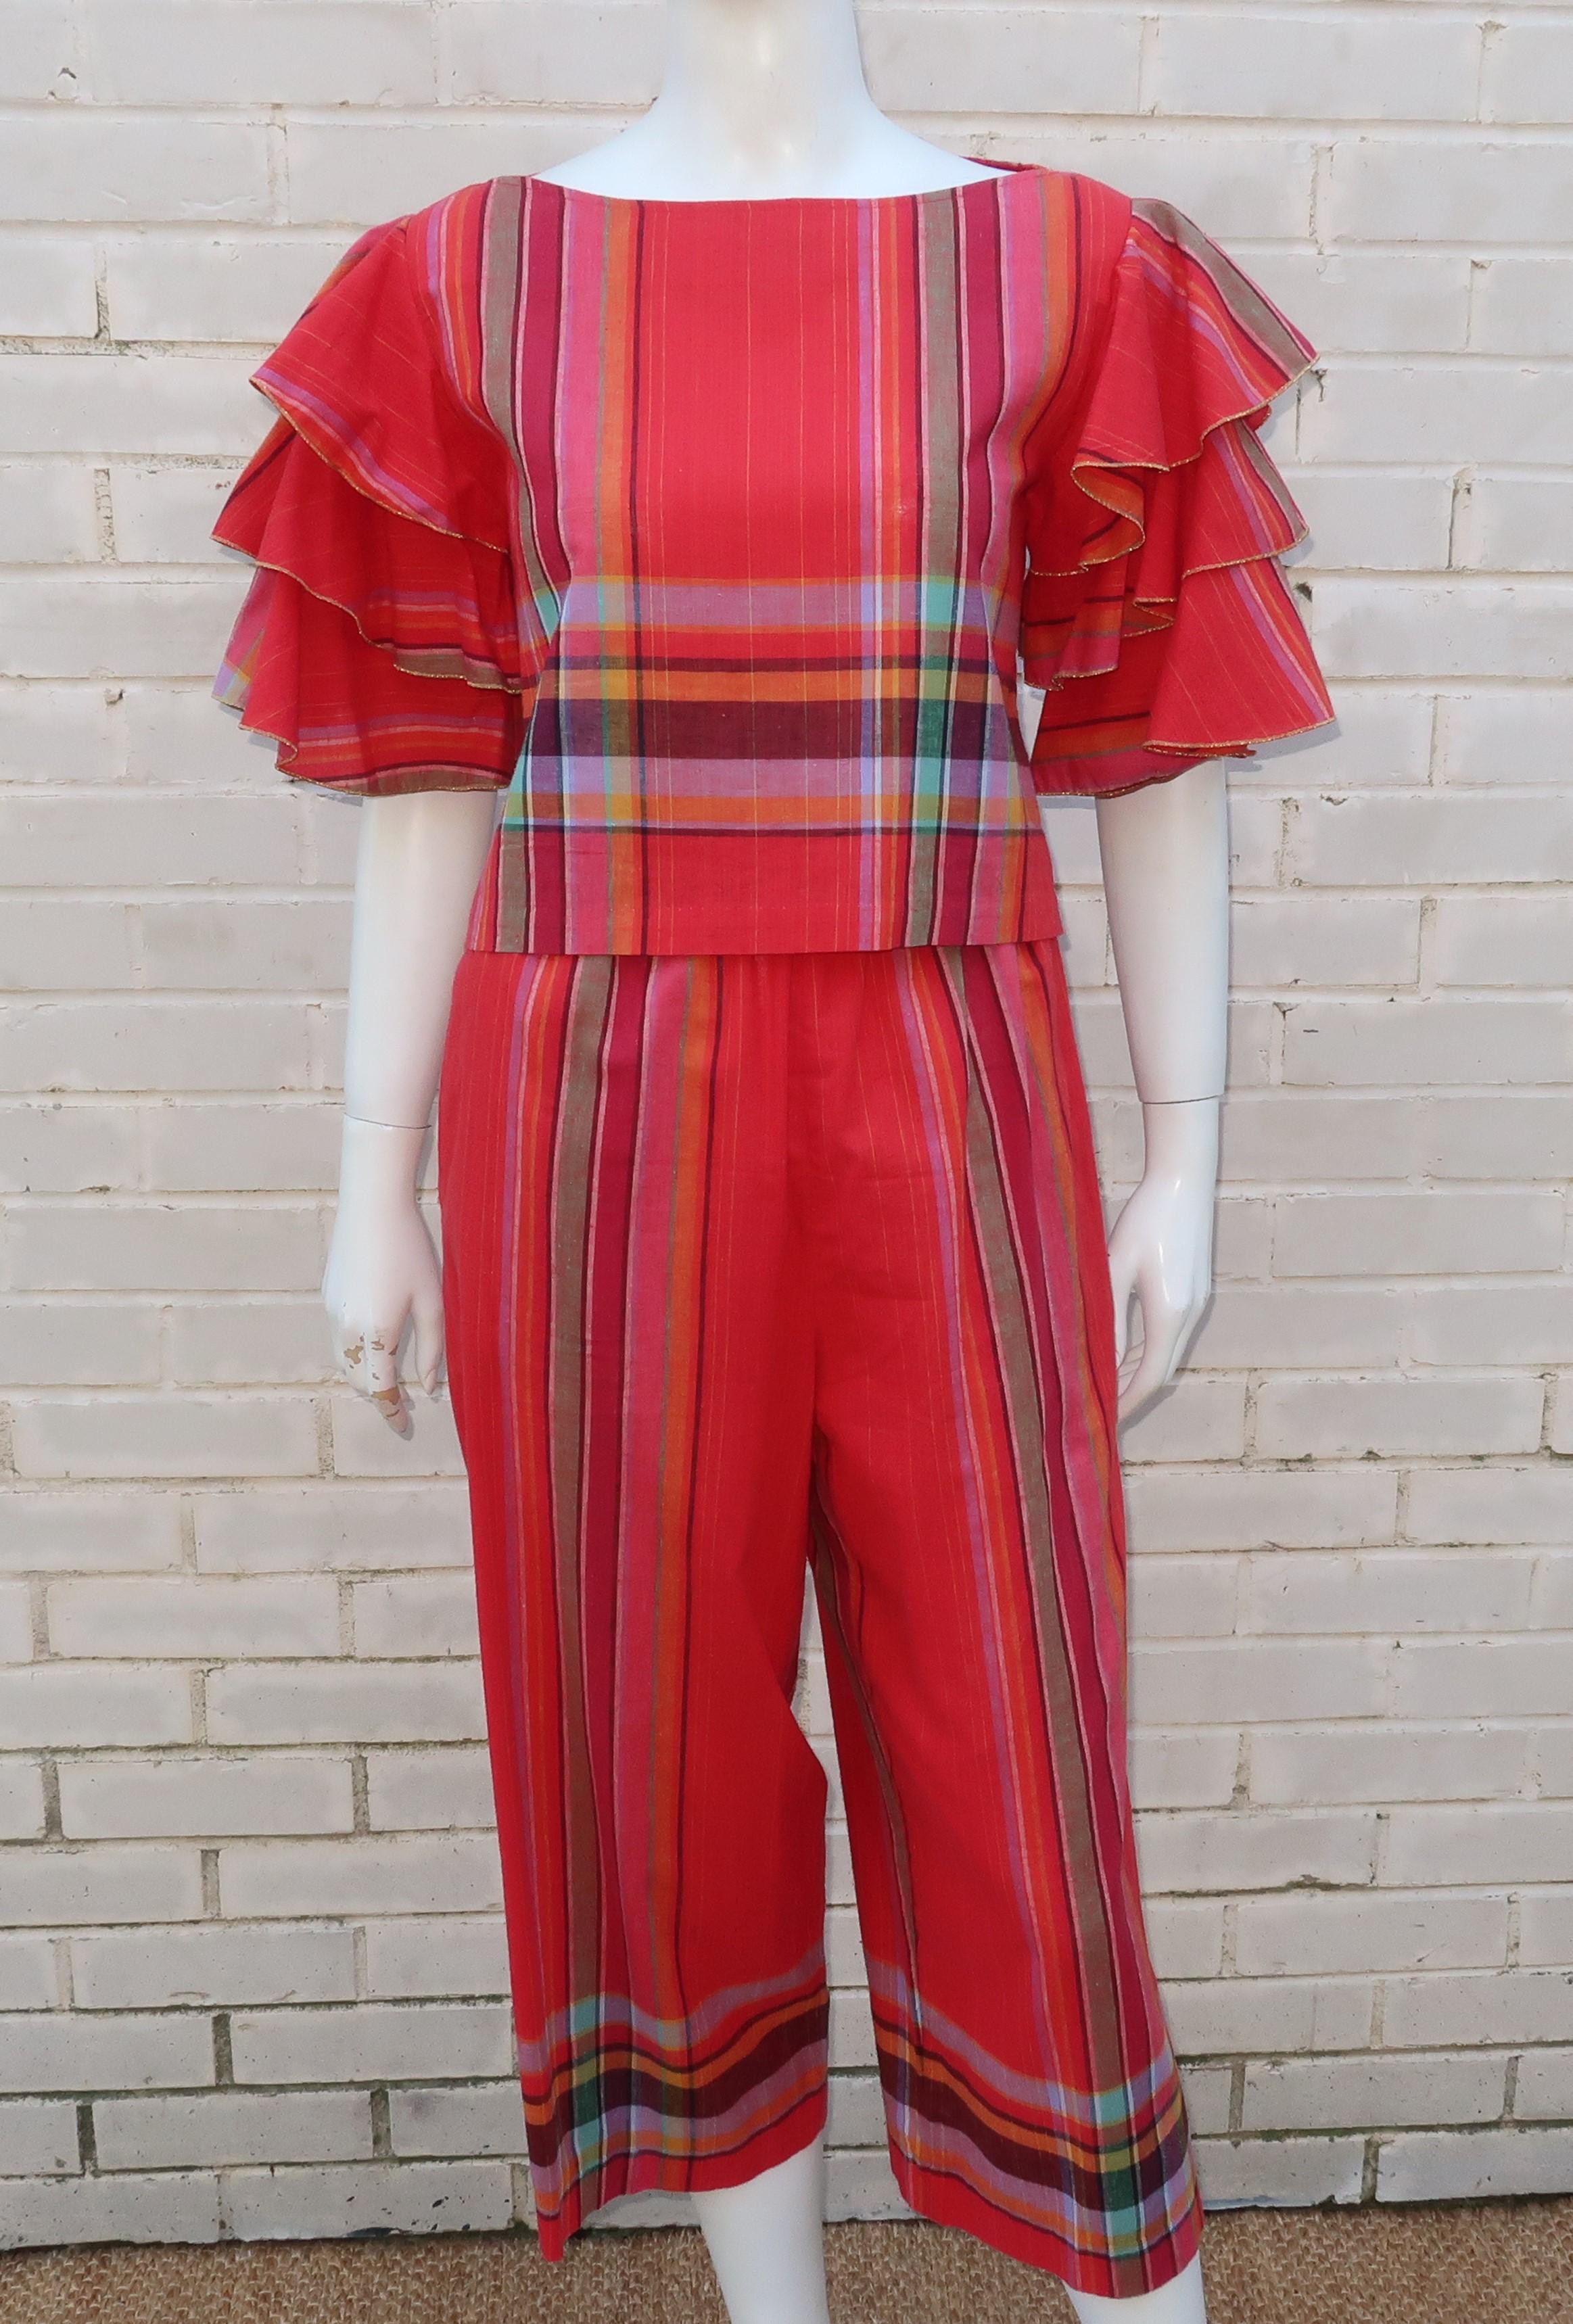 Transplanted New Yorker, Patti Cappalli, made a name for herself in California during the 1970's designing fun sports and leisure wear.  This adorable two piece pant suit is made from a festive madras plaid cotton in shades of red, orange, green and